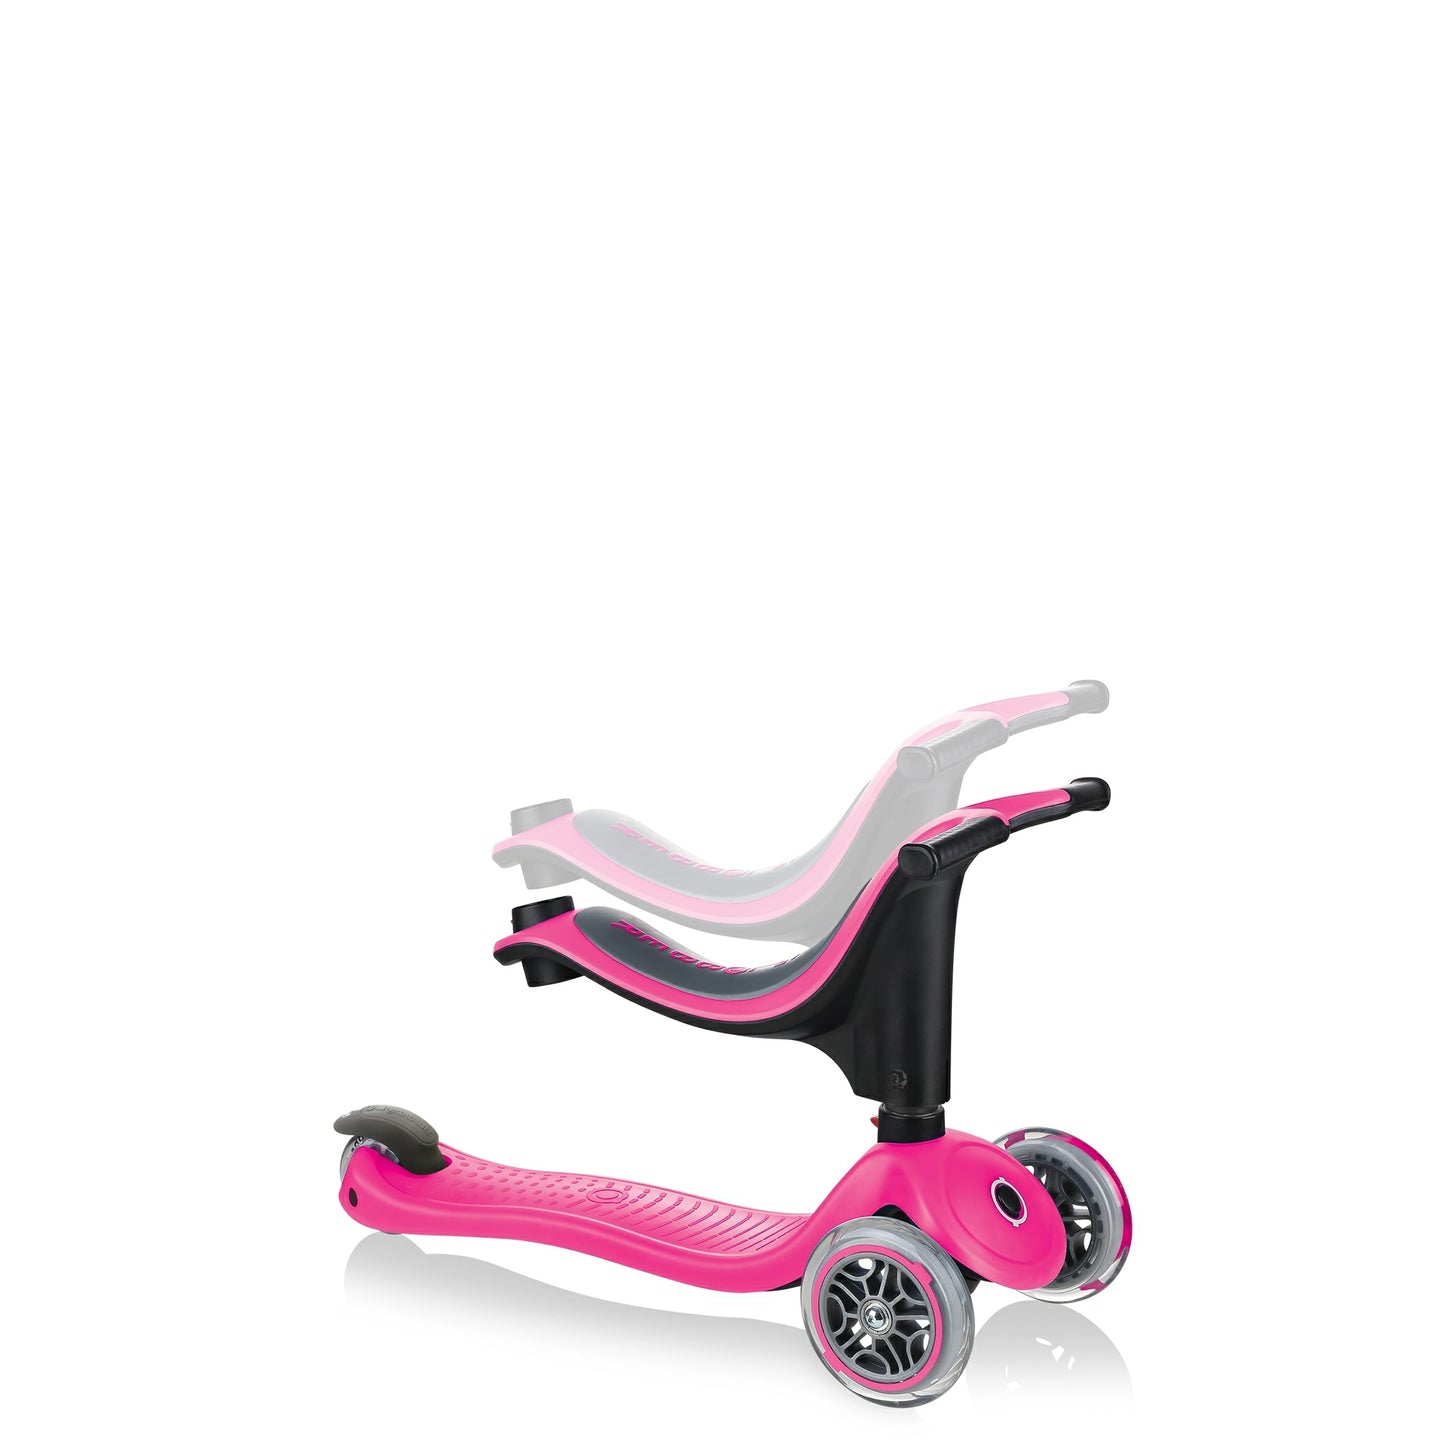 Monopattino 3 in 1 Go-Up Sporty, Deep Pink - Globber - Art. 451-110